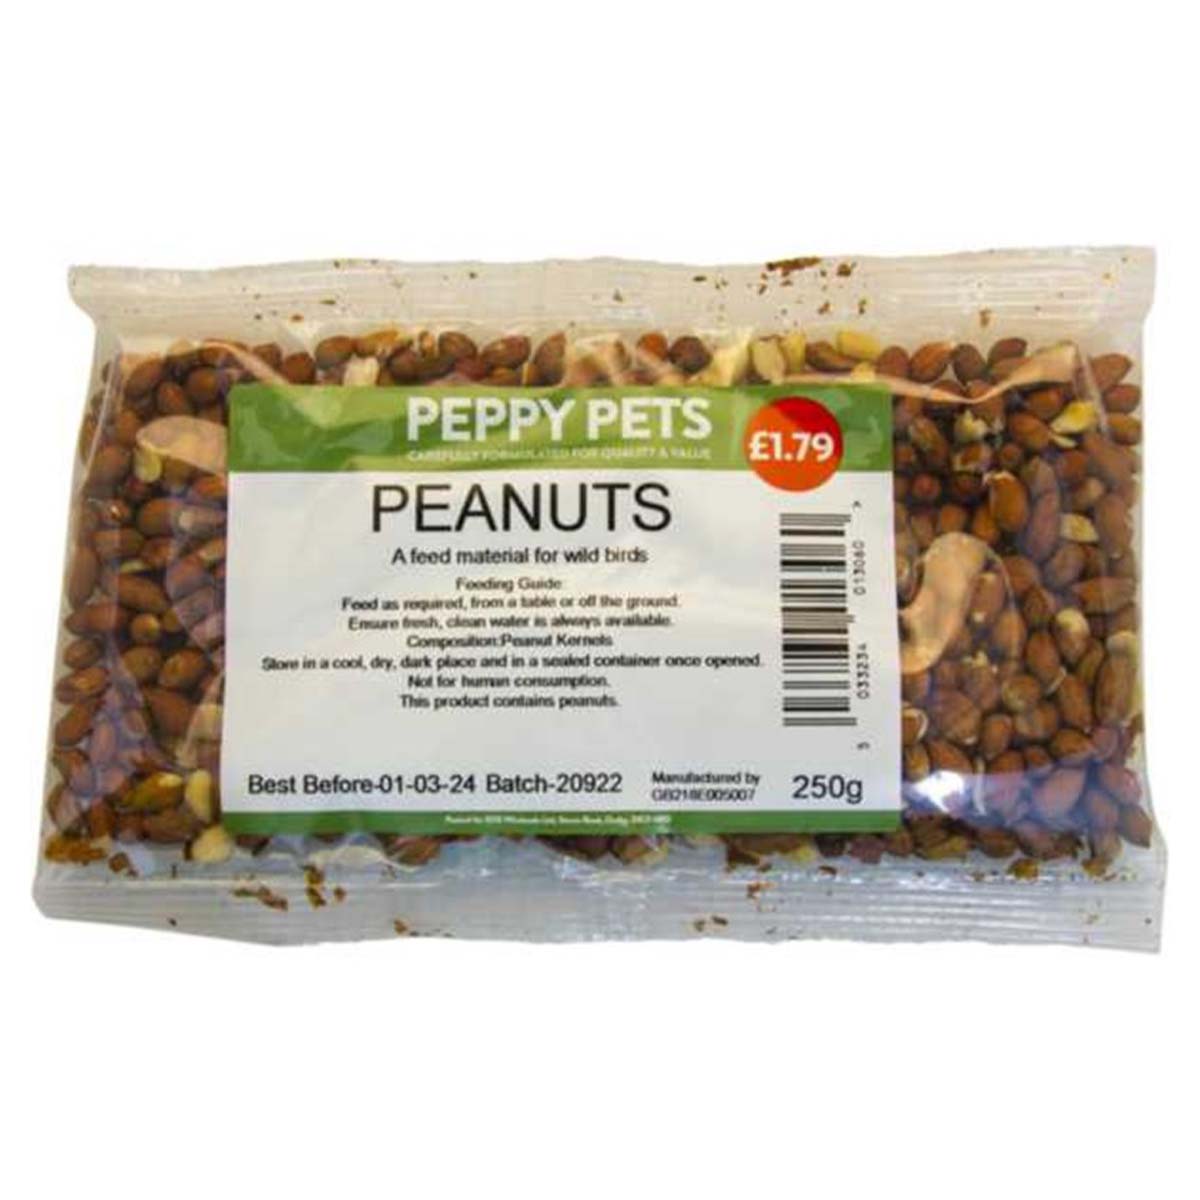 Peppy Pets - Peanuts - 250g - Continental Food Store